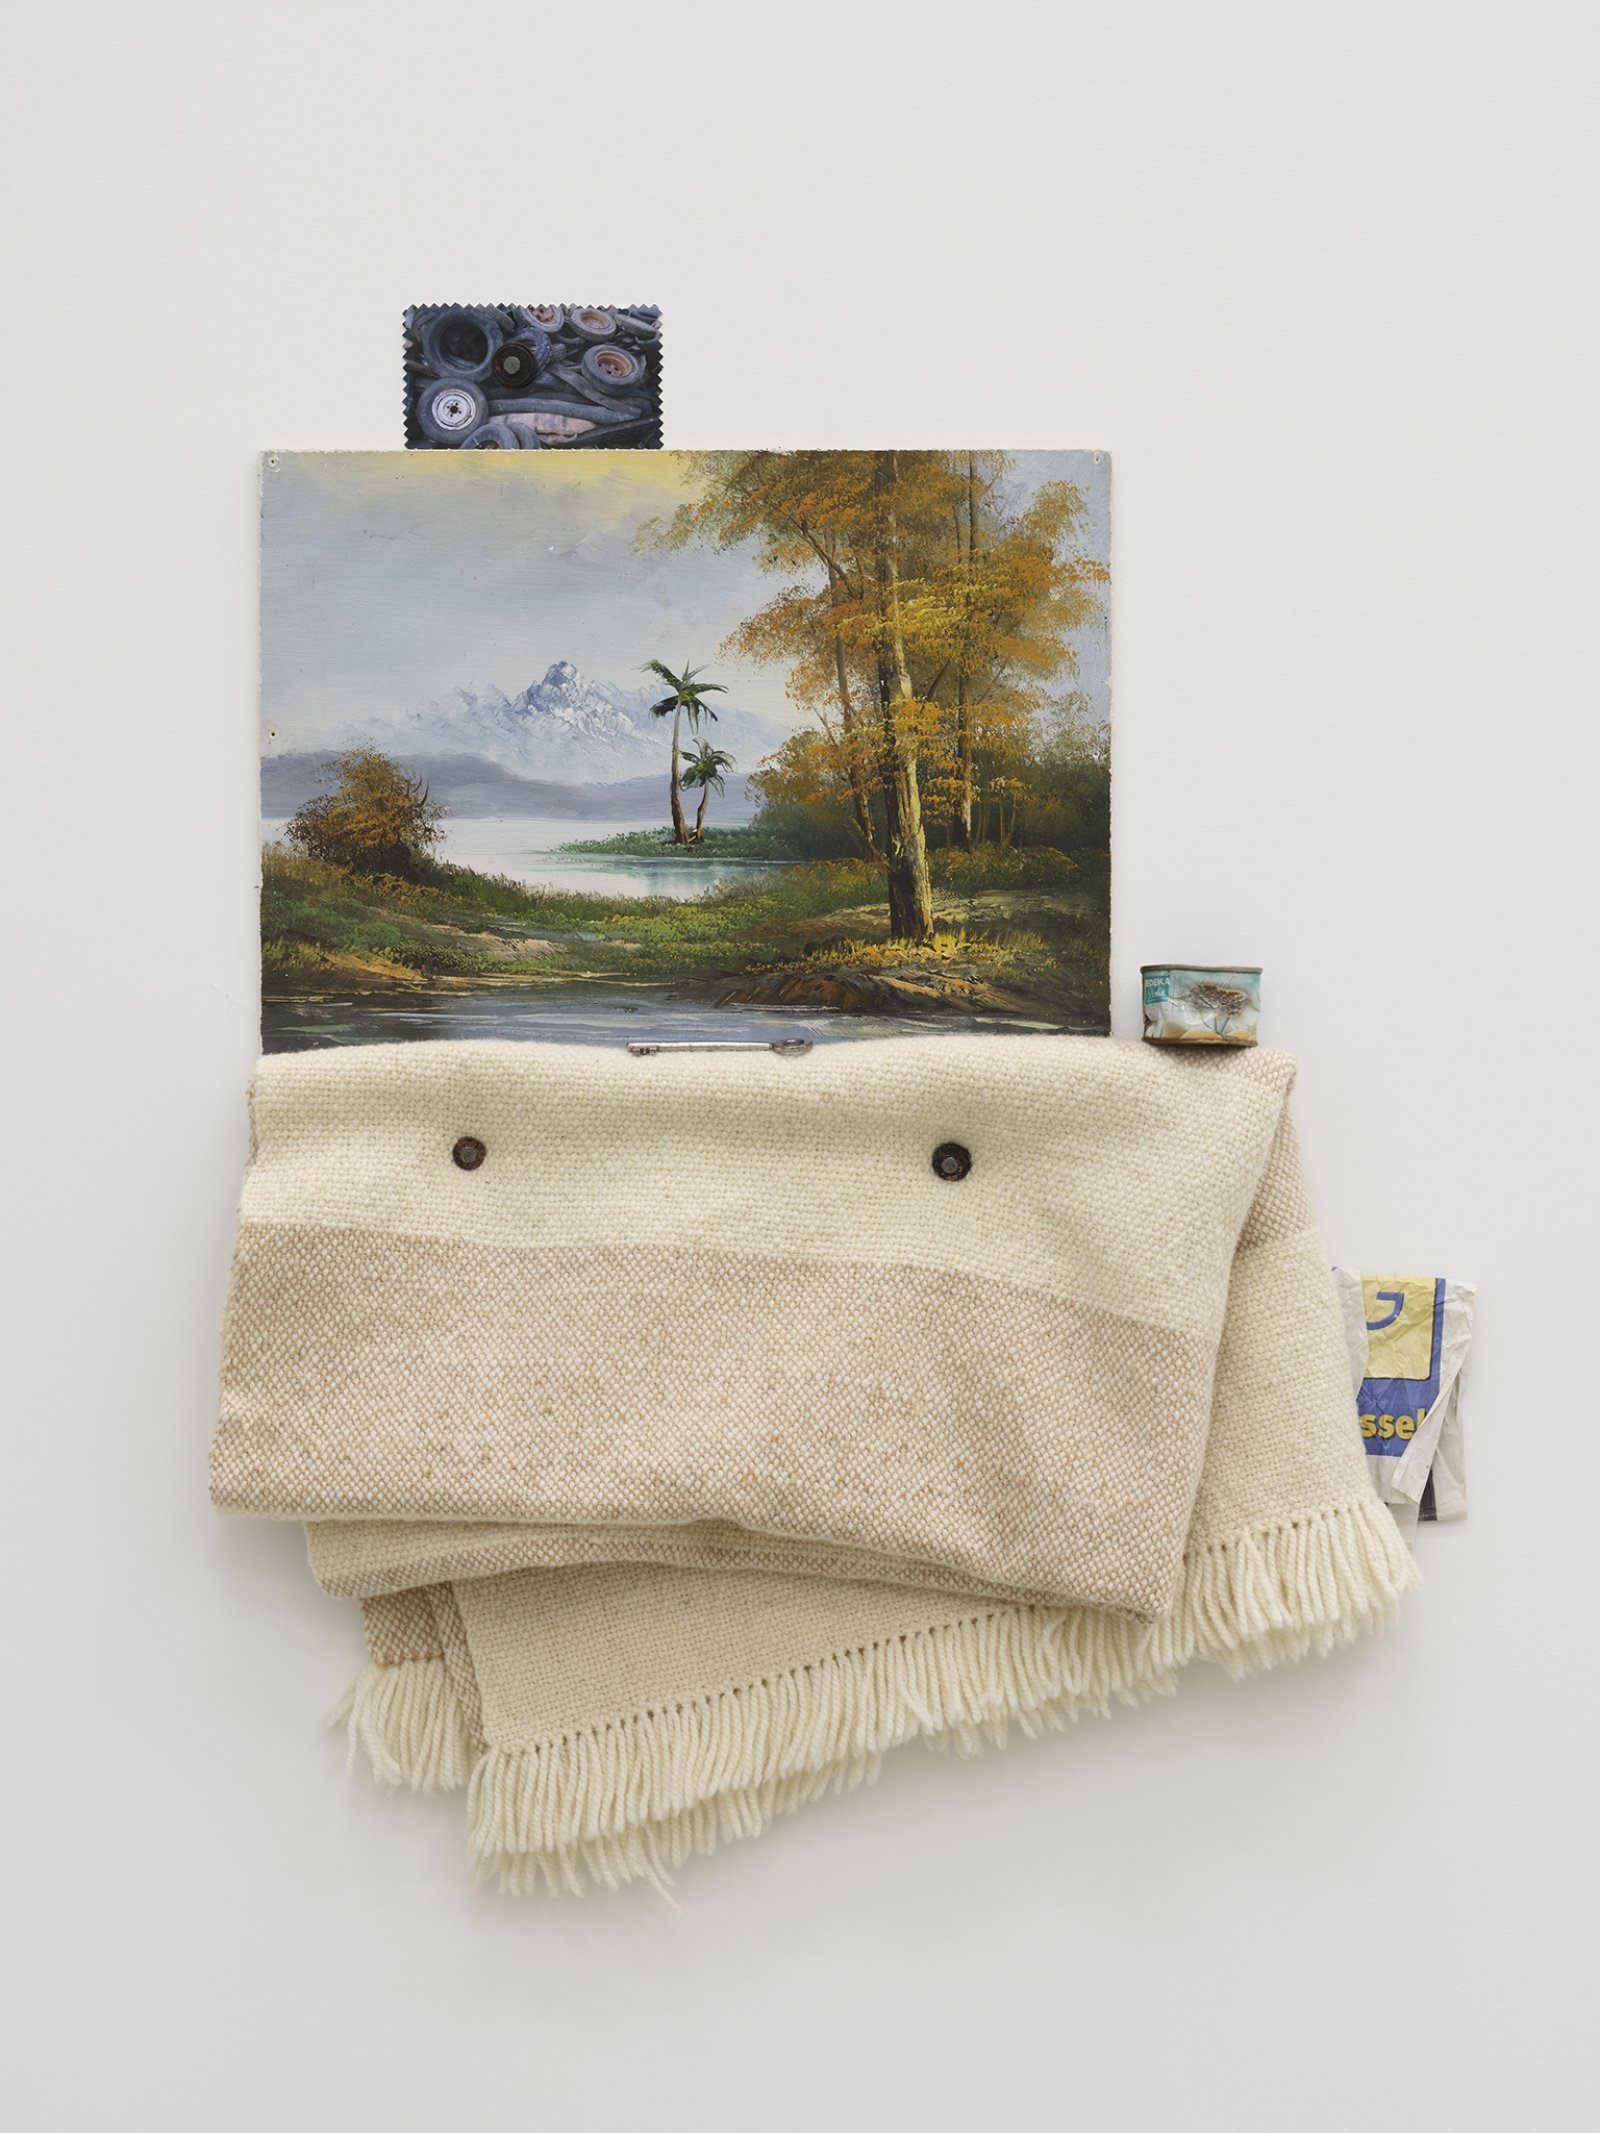 Ashes Withyman, Blanket (yew) from a place, near the buried canal, 2012–2016, found painting, photograph, advertising flyer, tin, door key, coins, nails, handspun wool dyed with yew woven by Anne Low, 30 x 24 in. (75 x 60 cm)